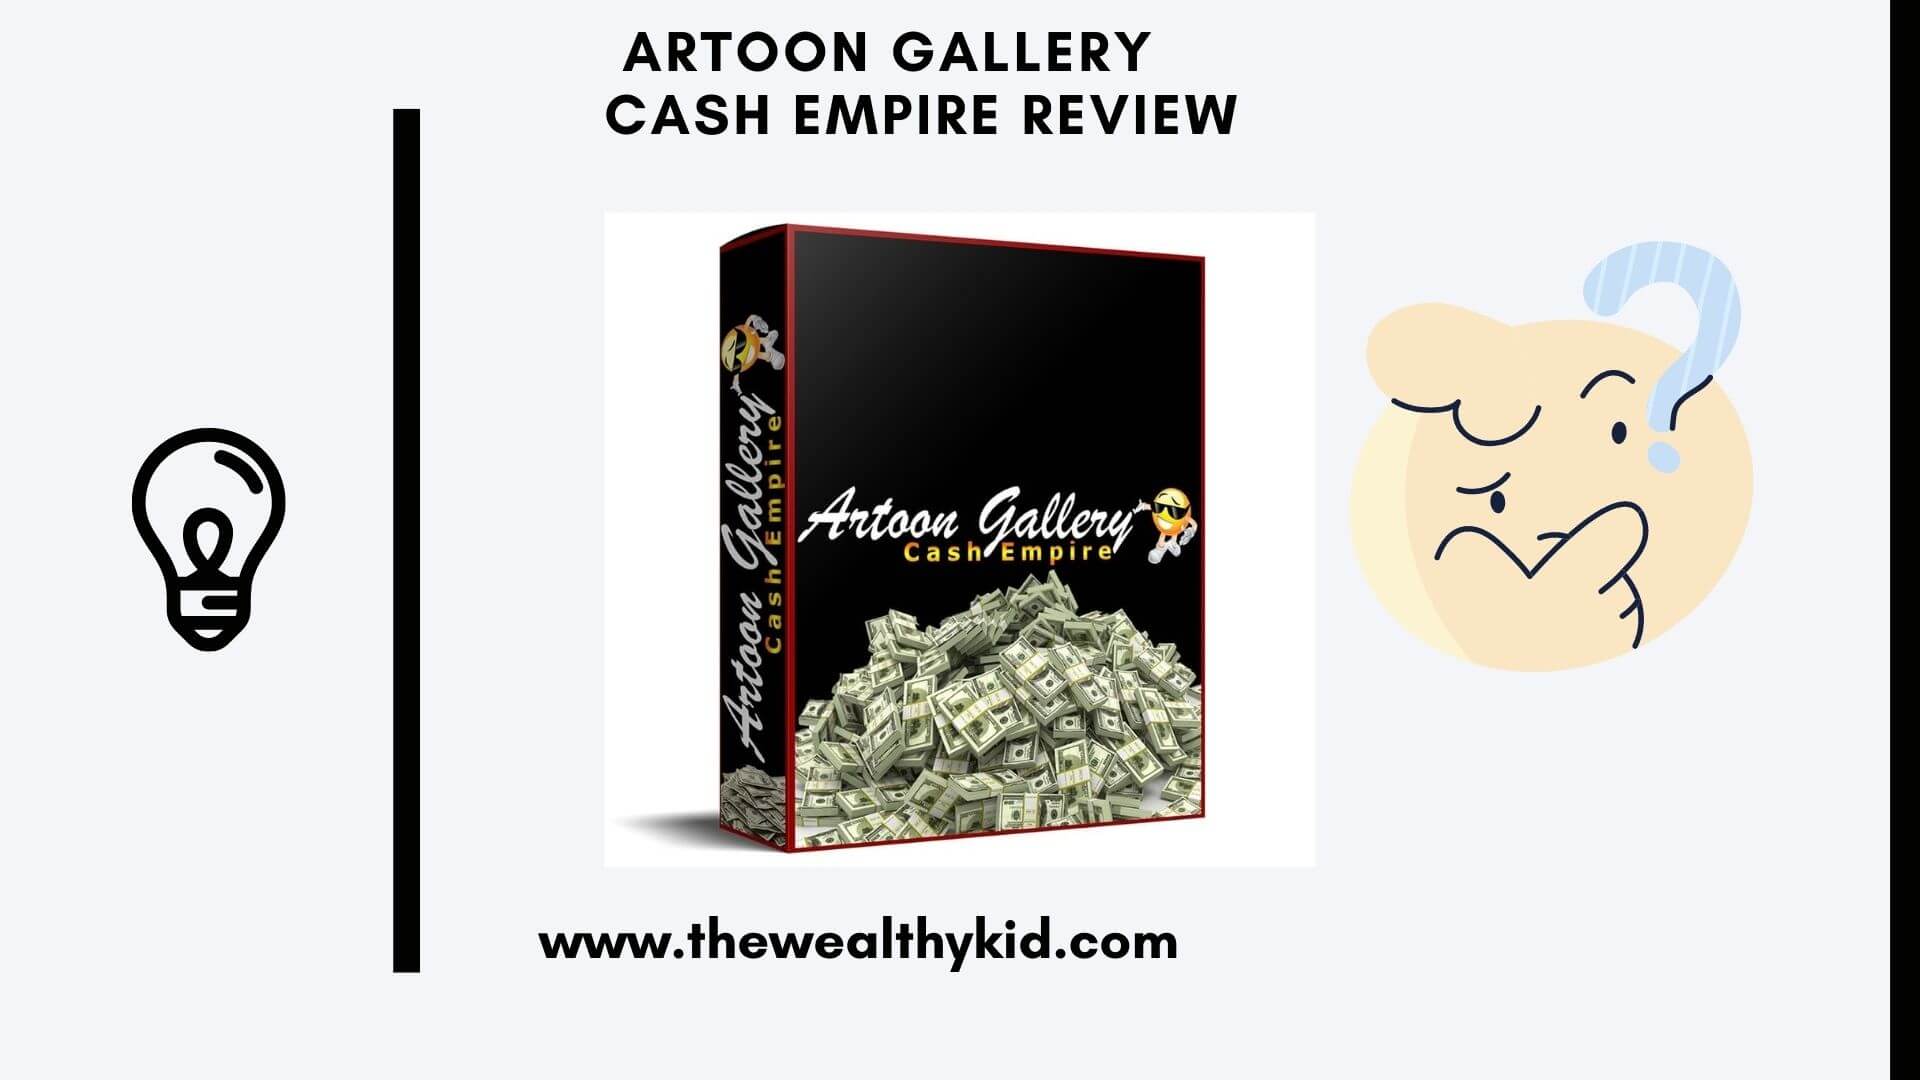 What is Artoon Gallery Cash Empire About?